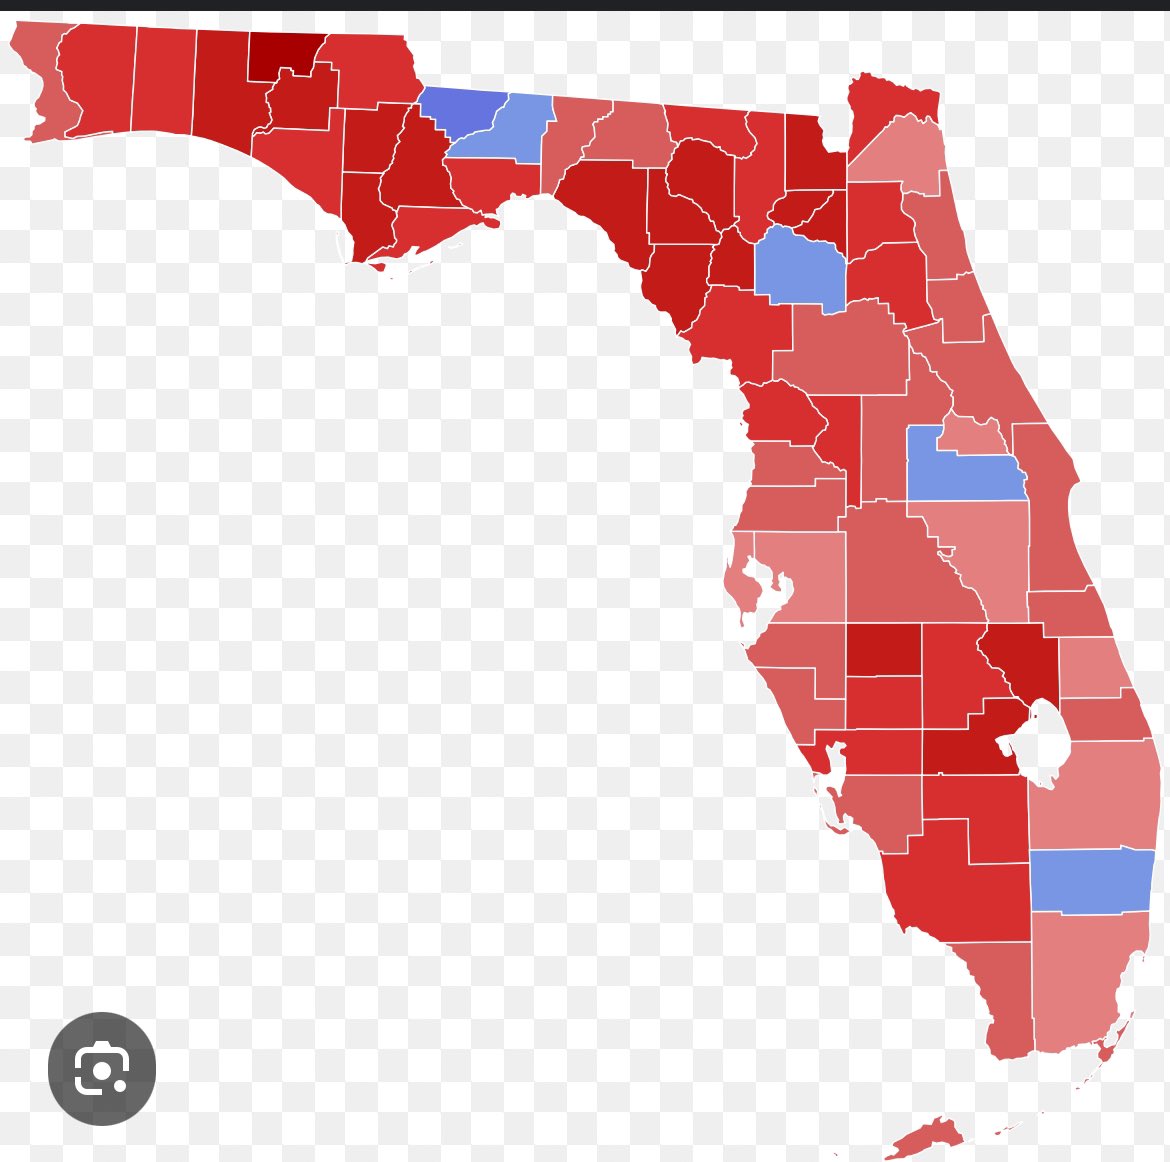 Another Magadonian that thinks Trump turned Florida Red. 

2020 and 2022.